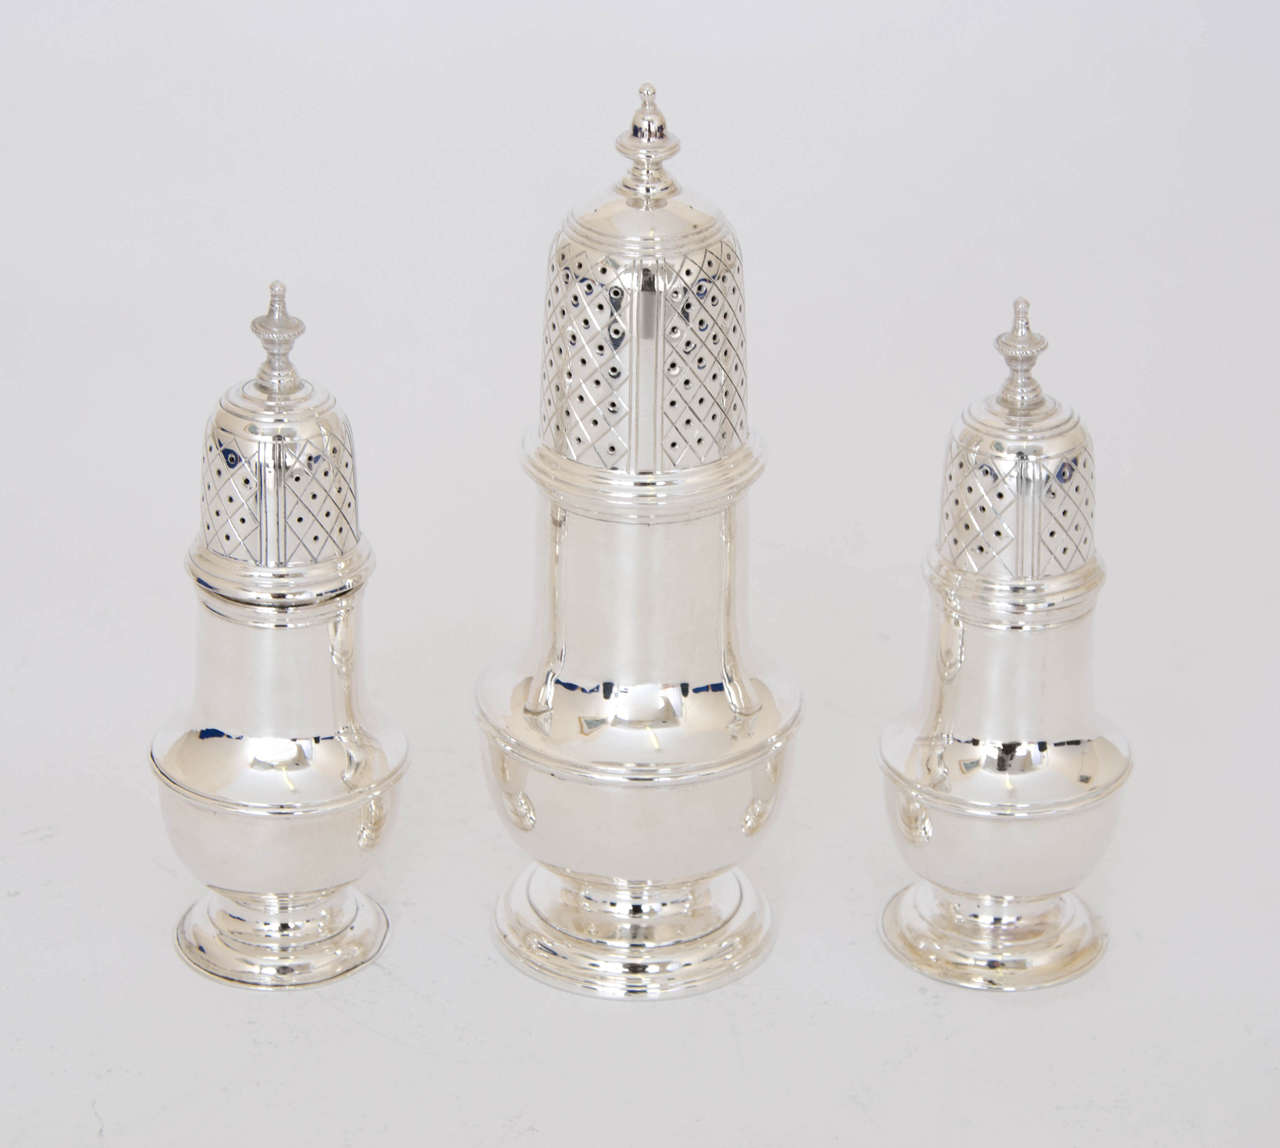 A suite of three George II Antique Silver Casters, I sugar and 2 peppers of circular bellied form, with pull-off covers and knop finials. Each one stands on a circular foot.  Height of Sugar Caster 6.50 inches 16.5 cm, Peppers 5 inches 12.5 cm